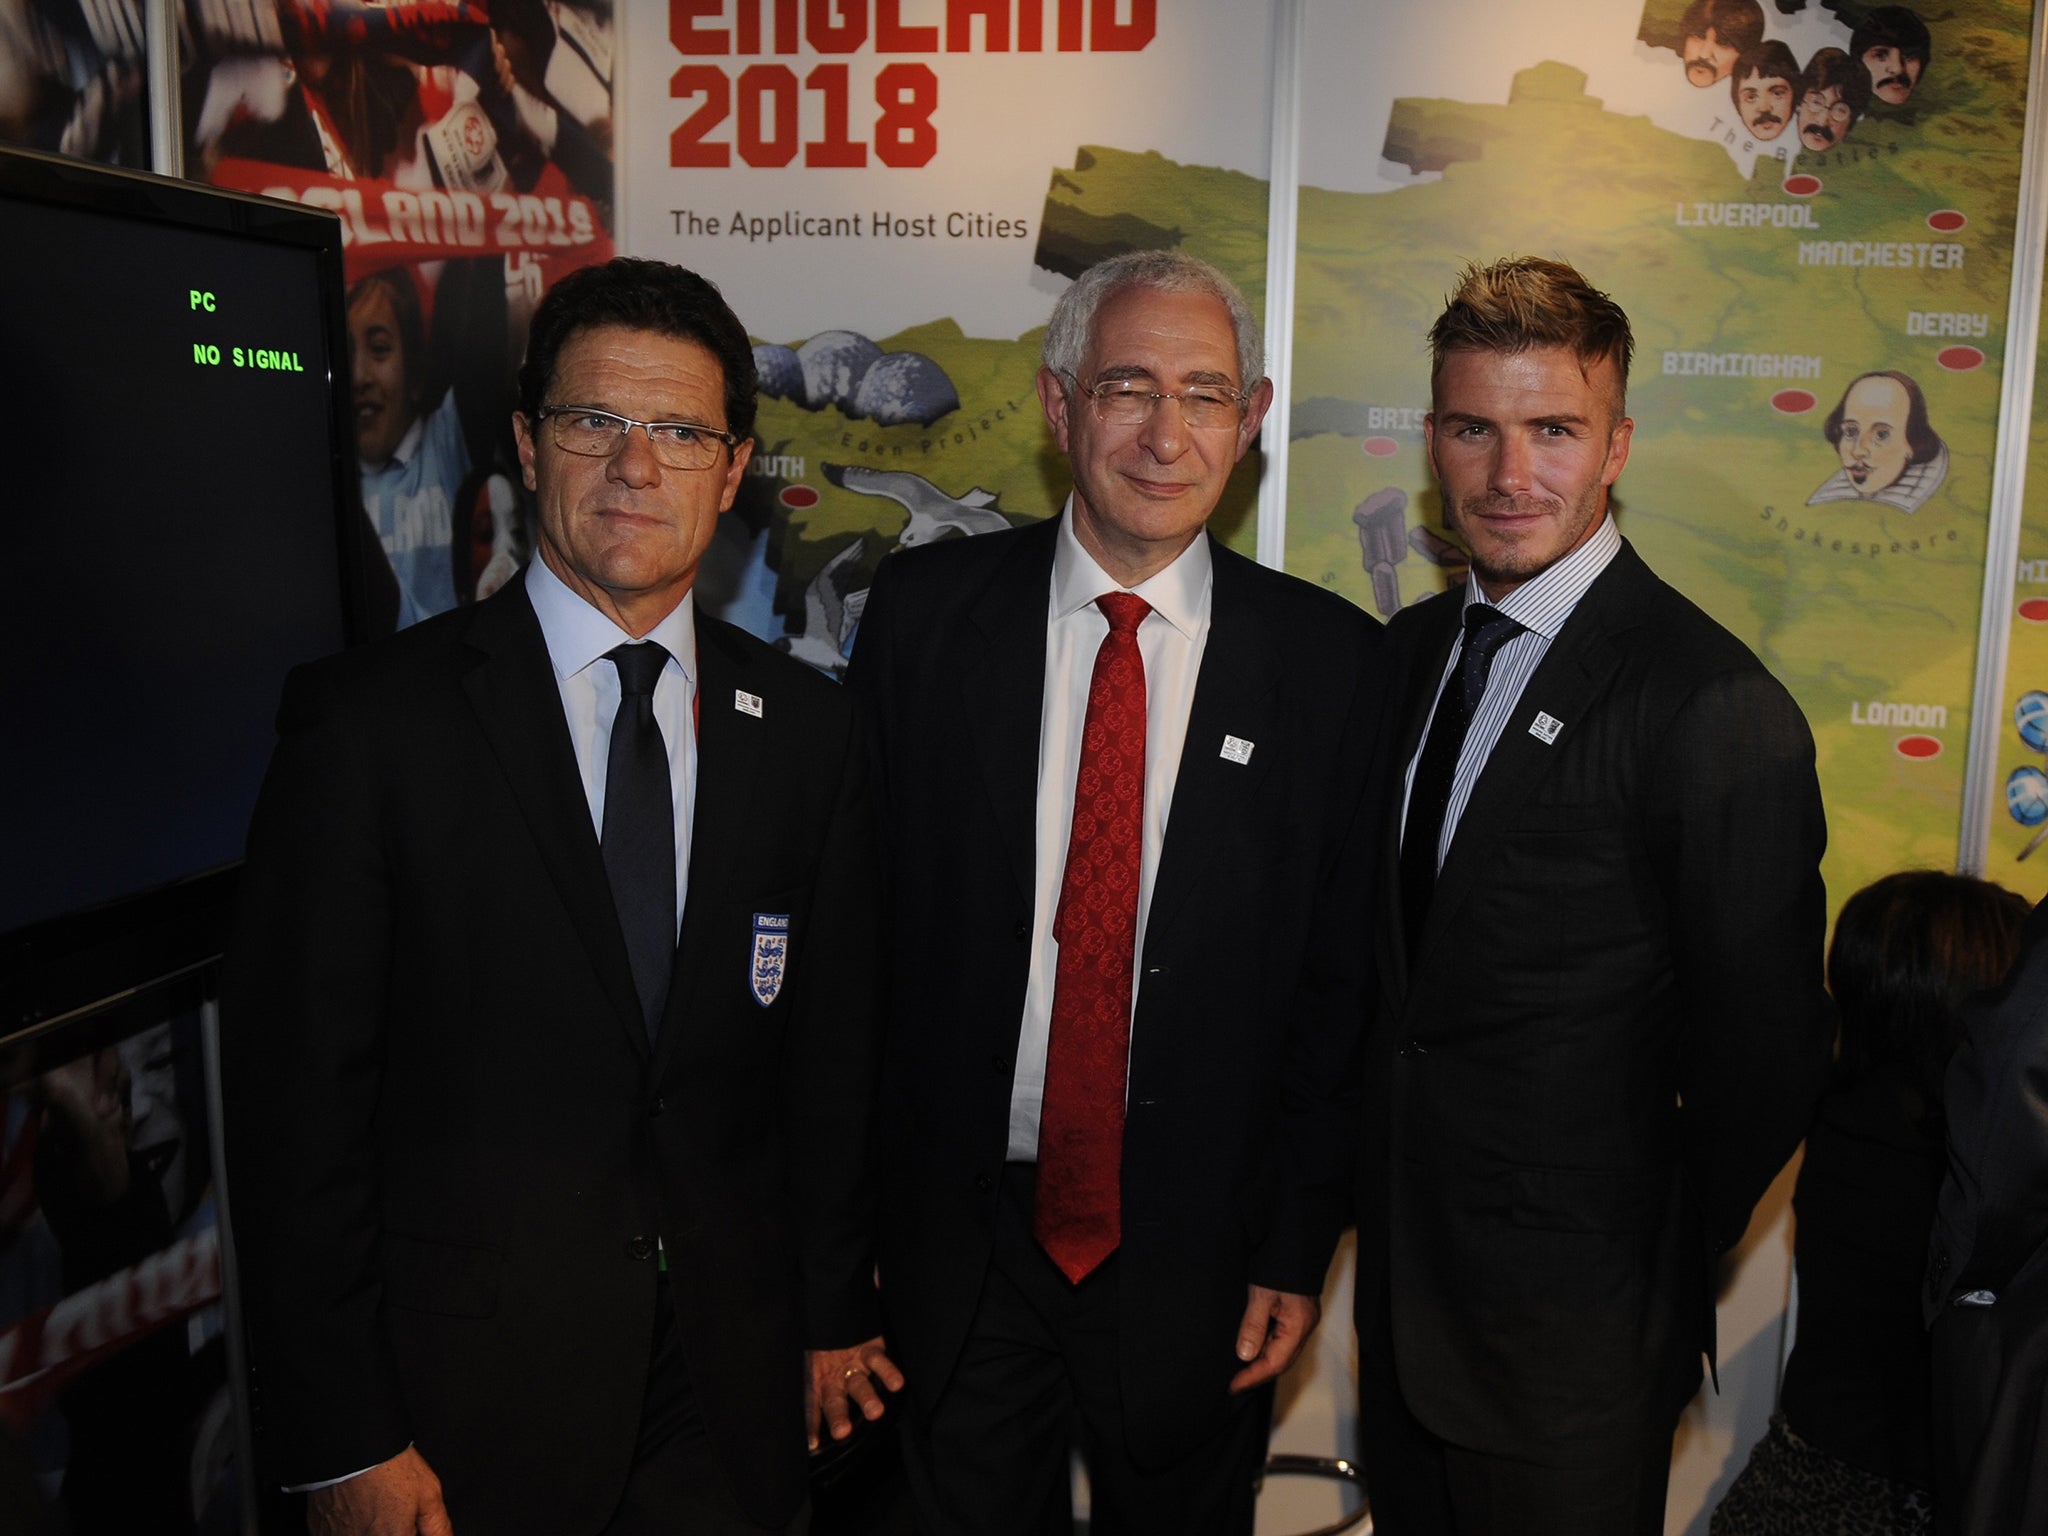 Left to right: England manager Fabio Capello, FA chairman Lord Triesman and David Beckham led the 2018 bid (Getty Images)